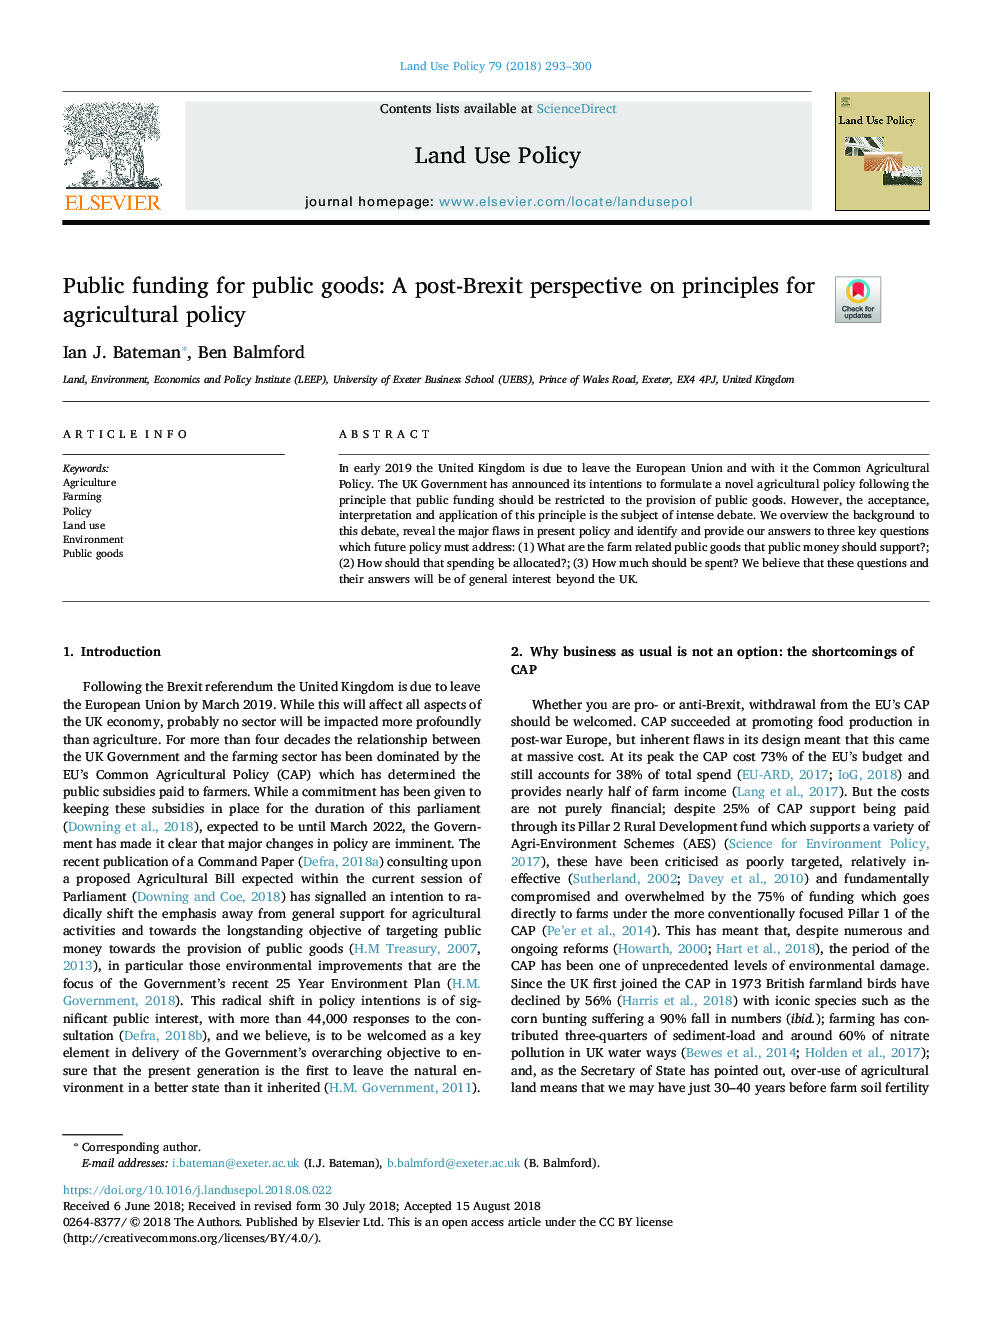 Public funding for public goods: A post-Brexit perspective on principles for agricultural policy